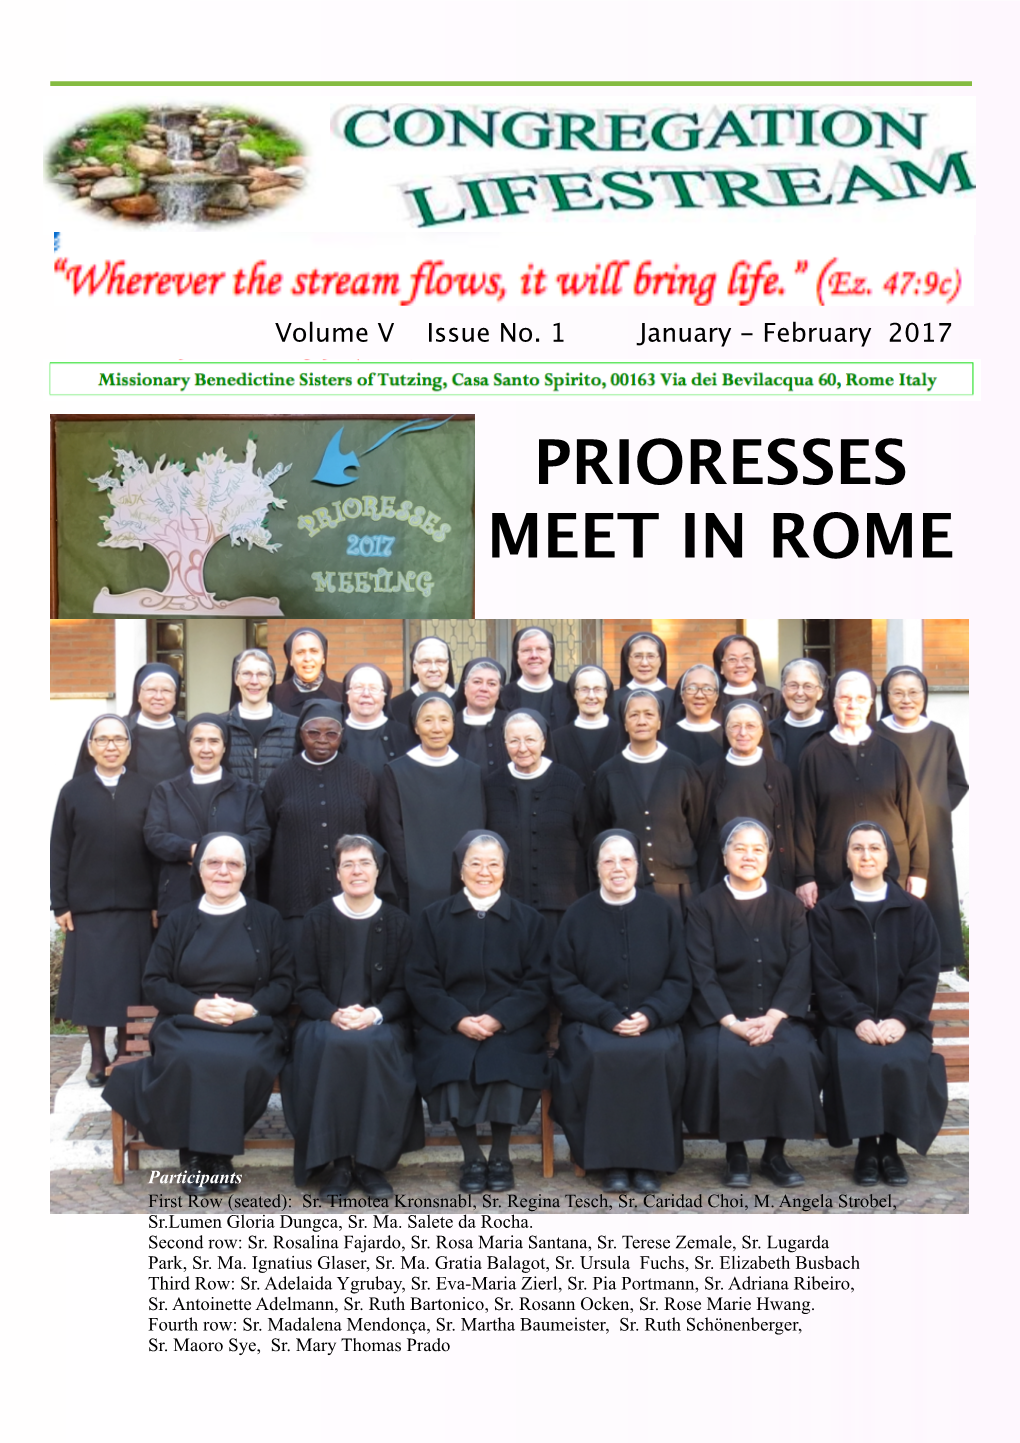 The 1St Issue 2017 of the Congregation Newsletter "Lifestream"